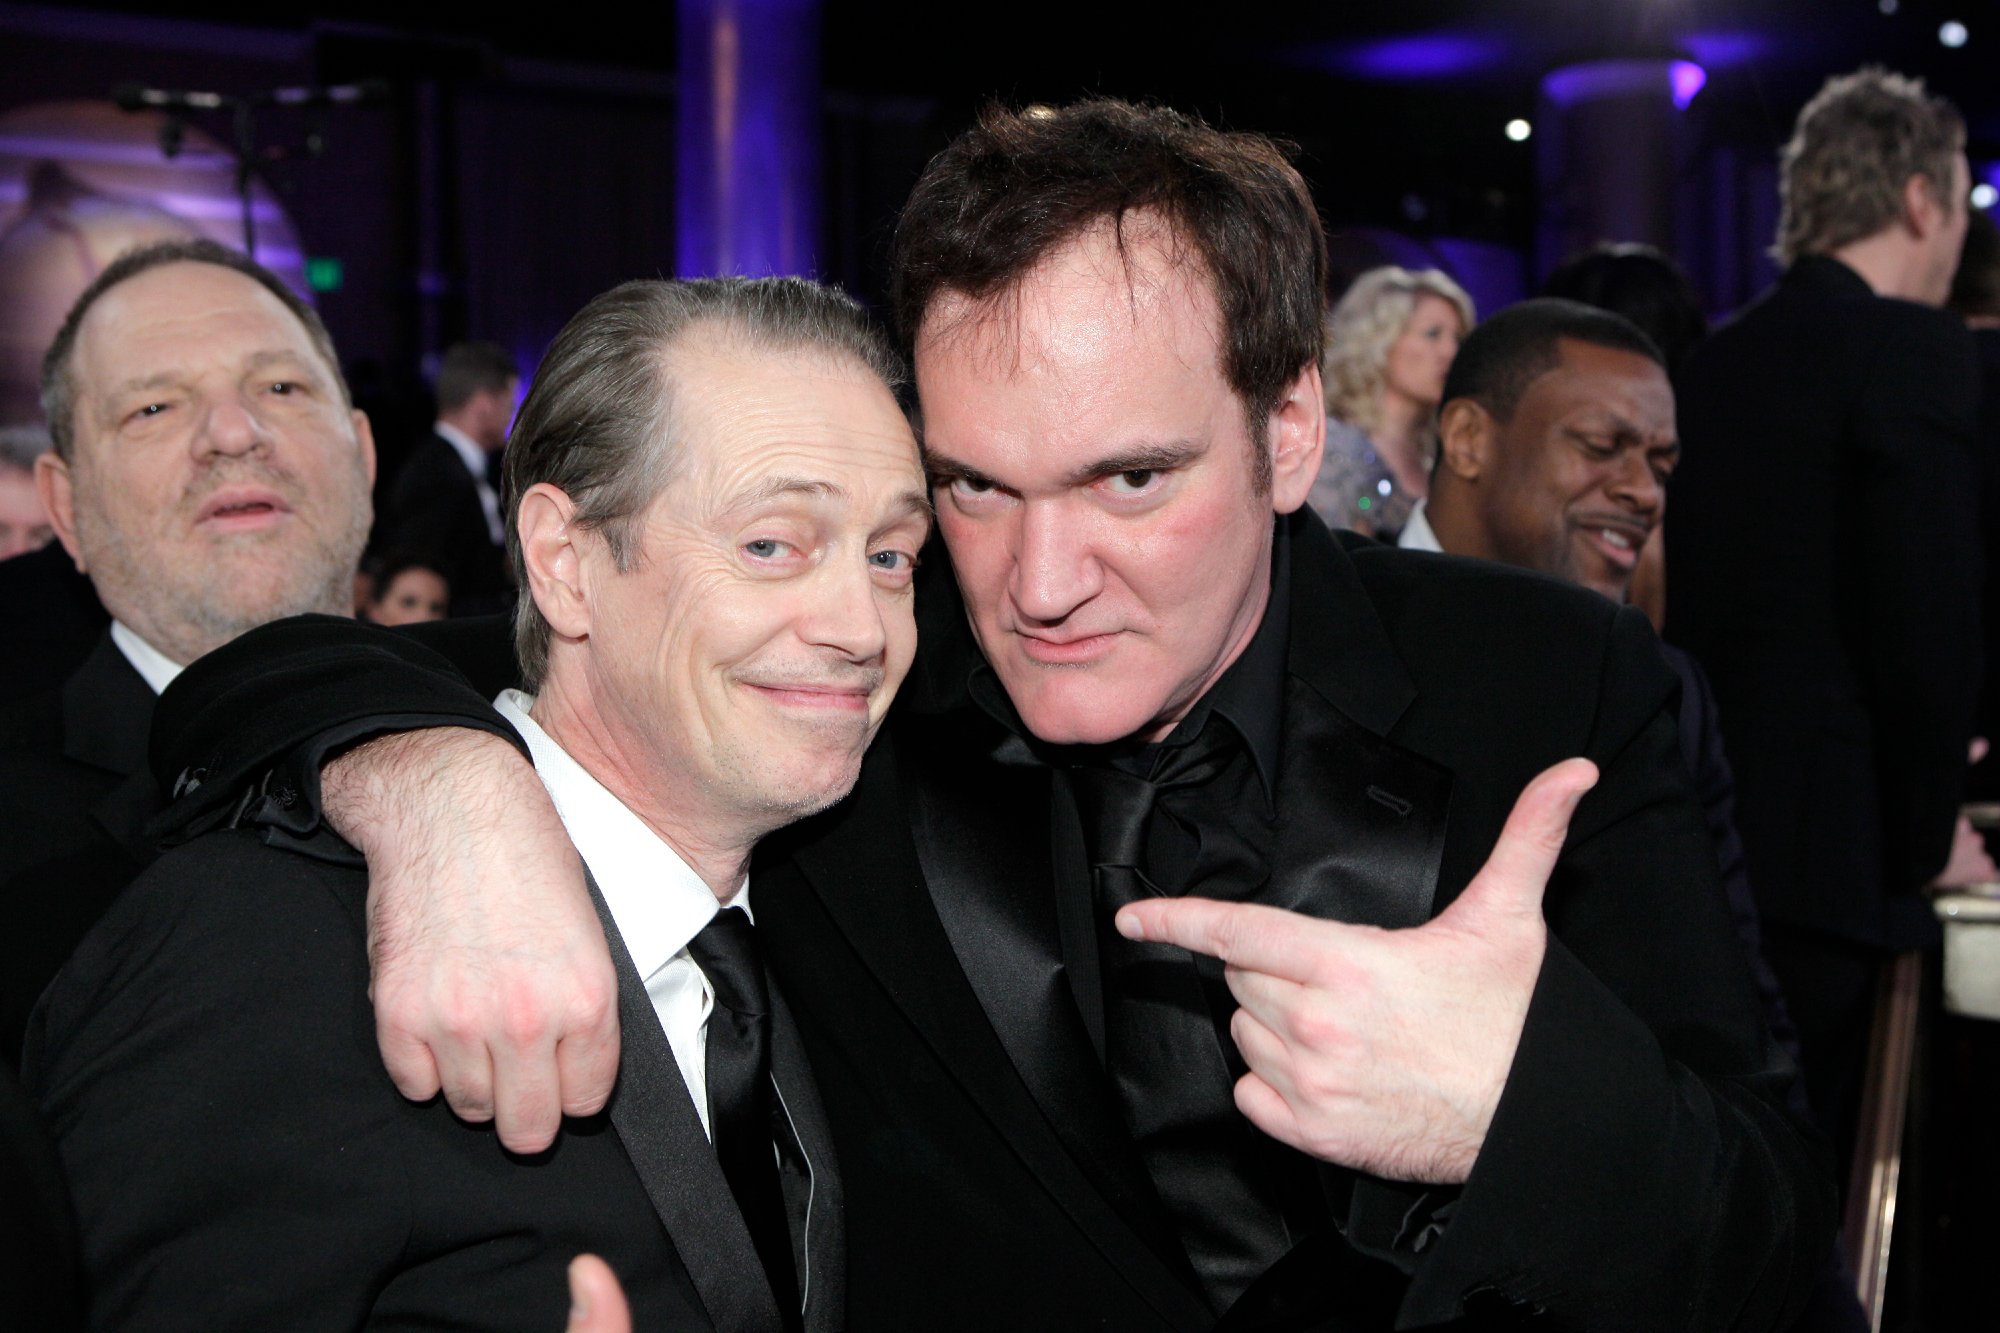 'Reservoir Dogs' star Steve Buscemi and writer_director Quentin Tarantino at the Golden Globes